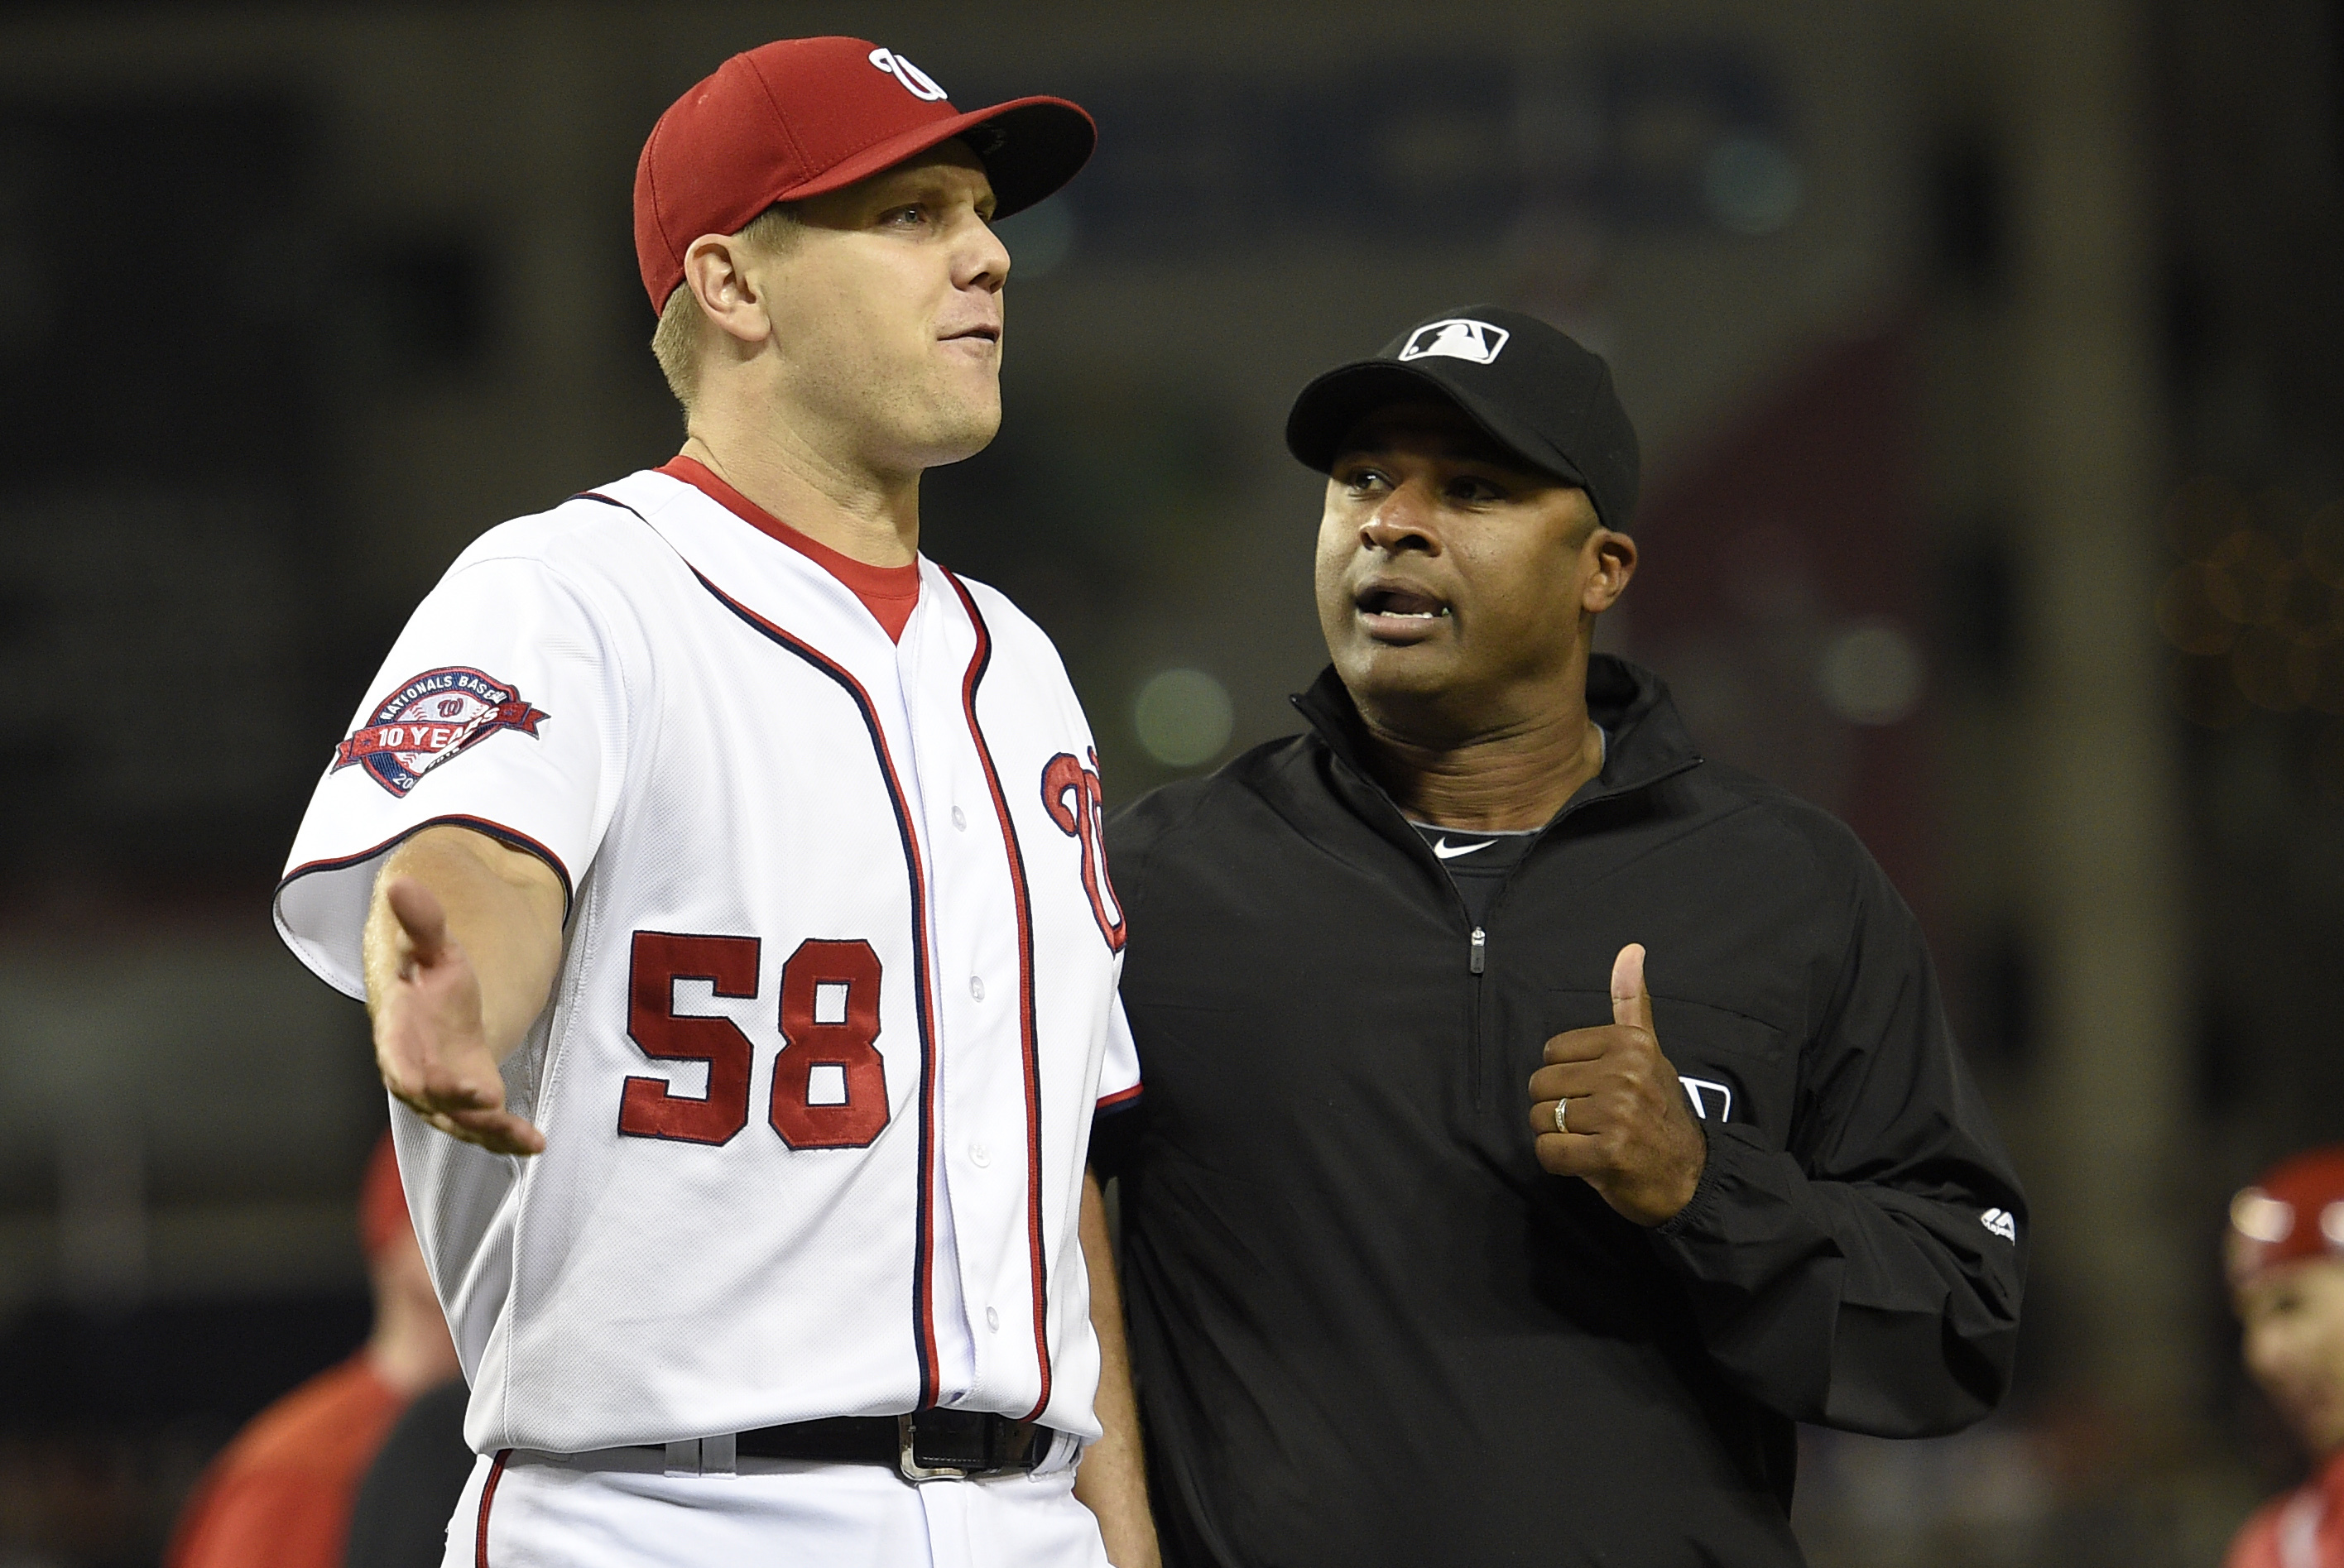 Jonathan Papelbon Gets Suspended for the Rest of the Season